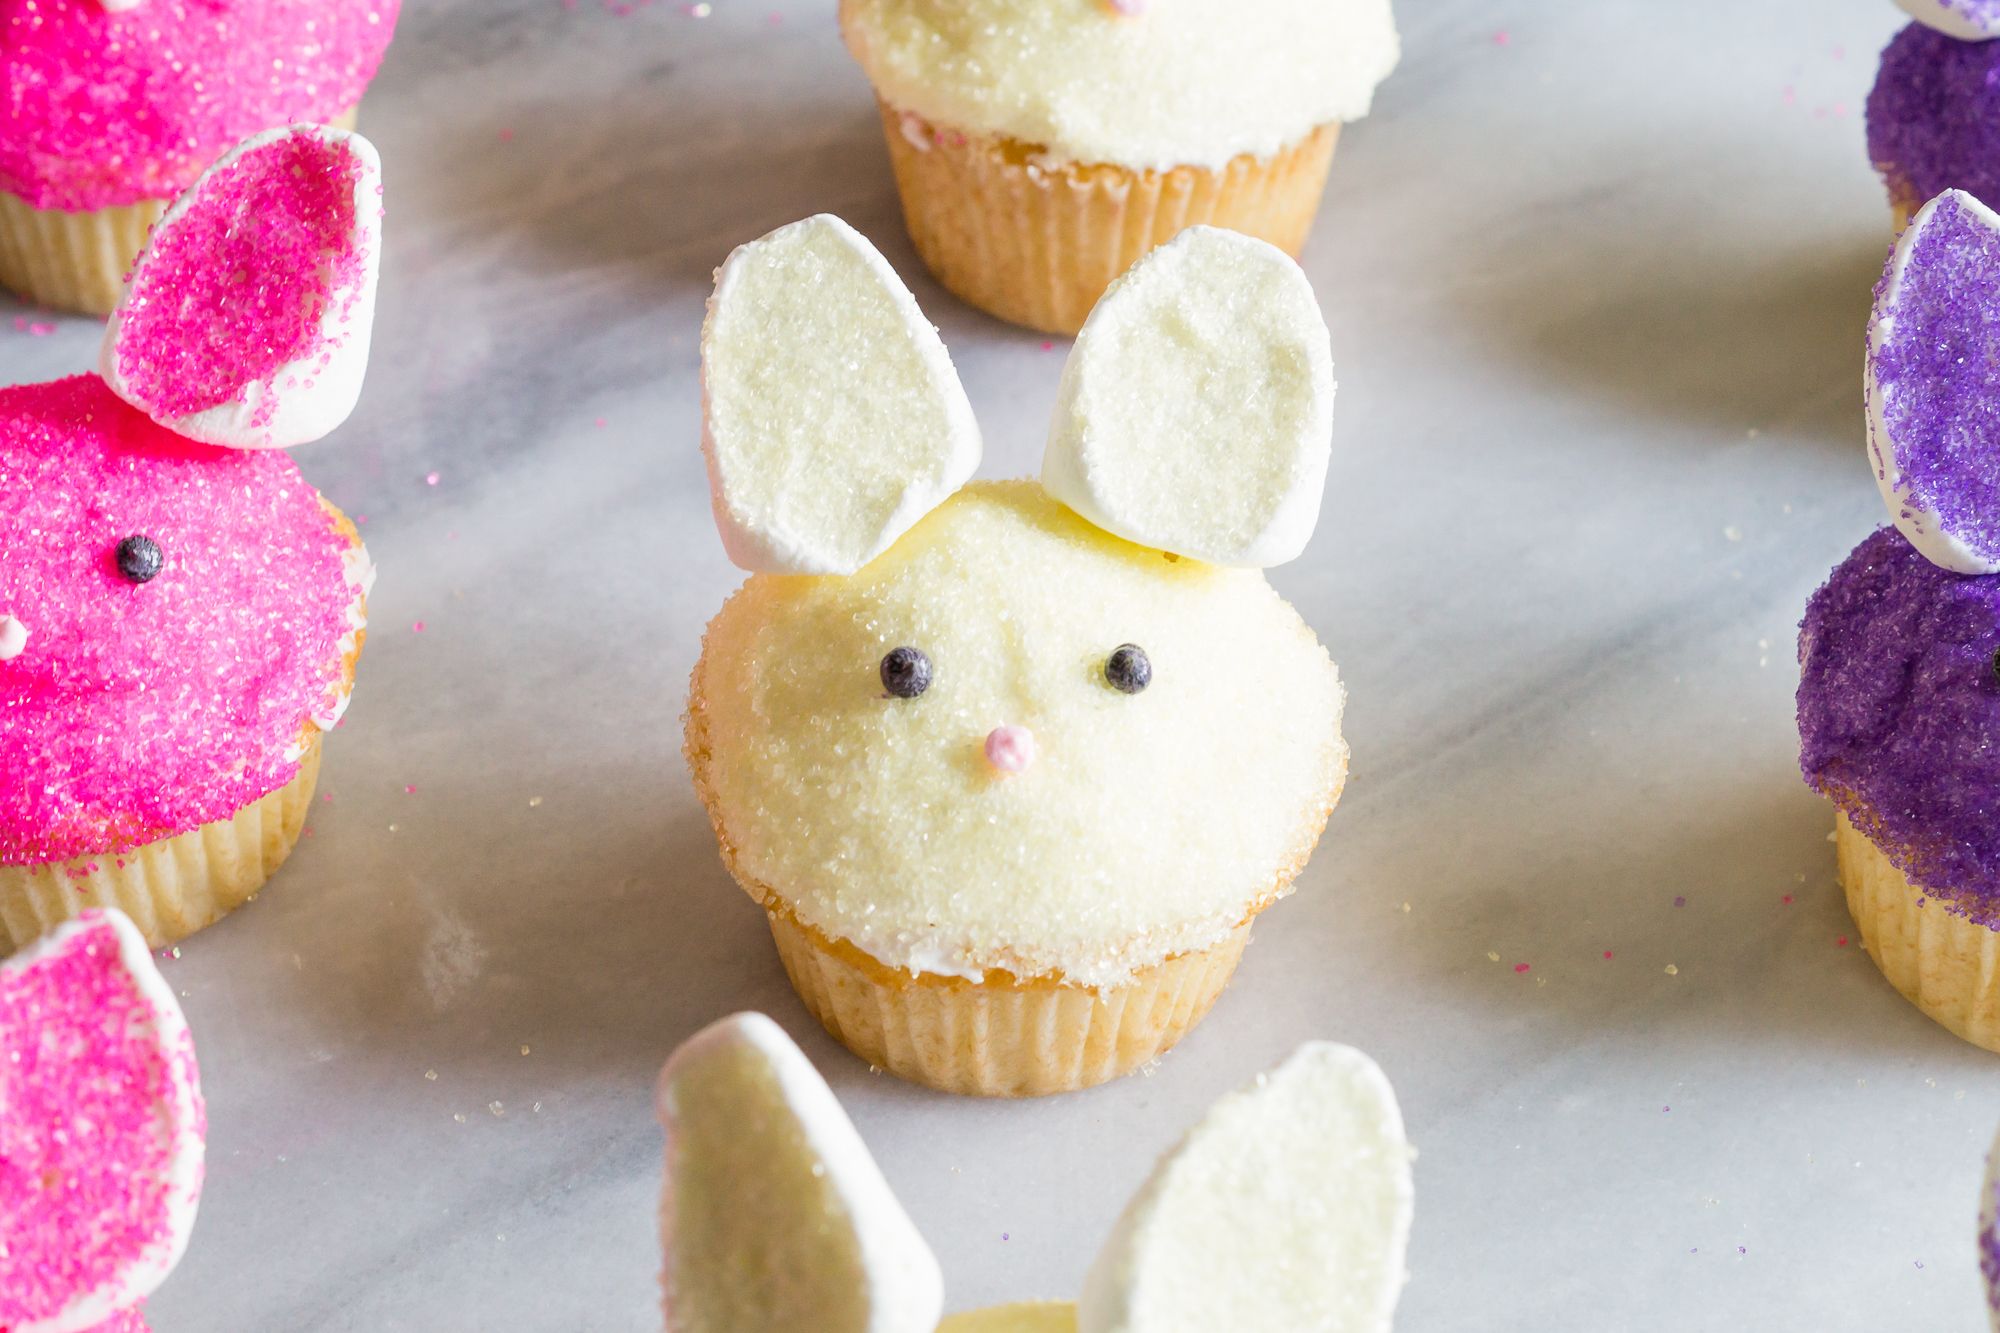 Aggregate more than 135 easter cupcake decorating ideas latest - seven ...